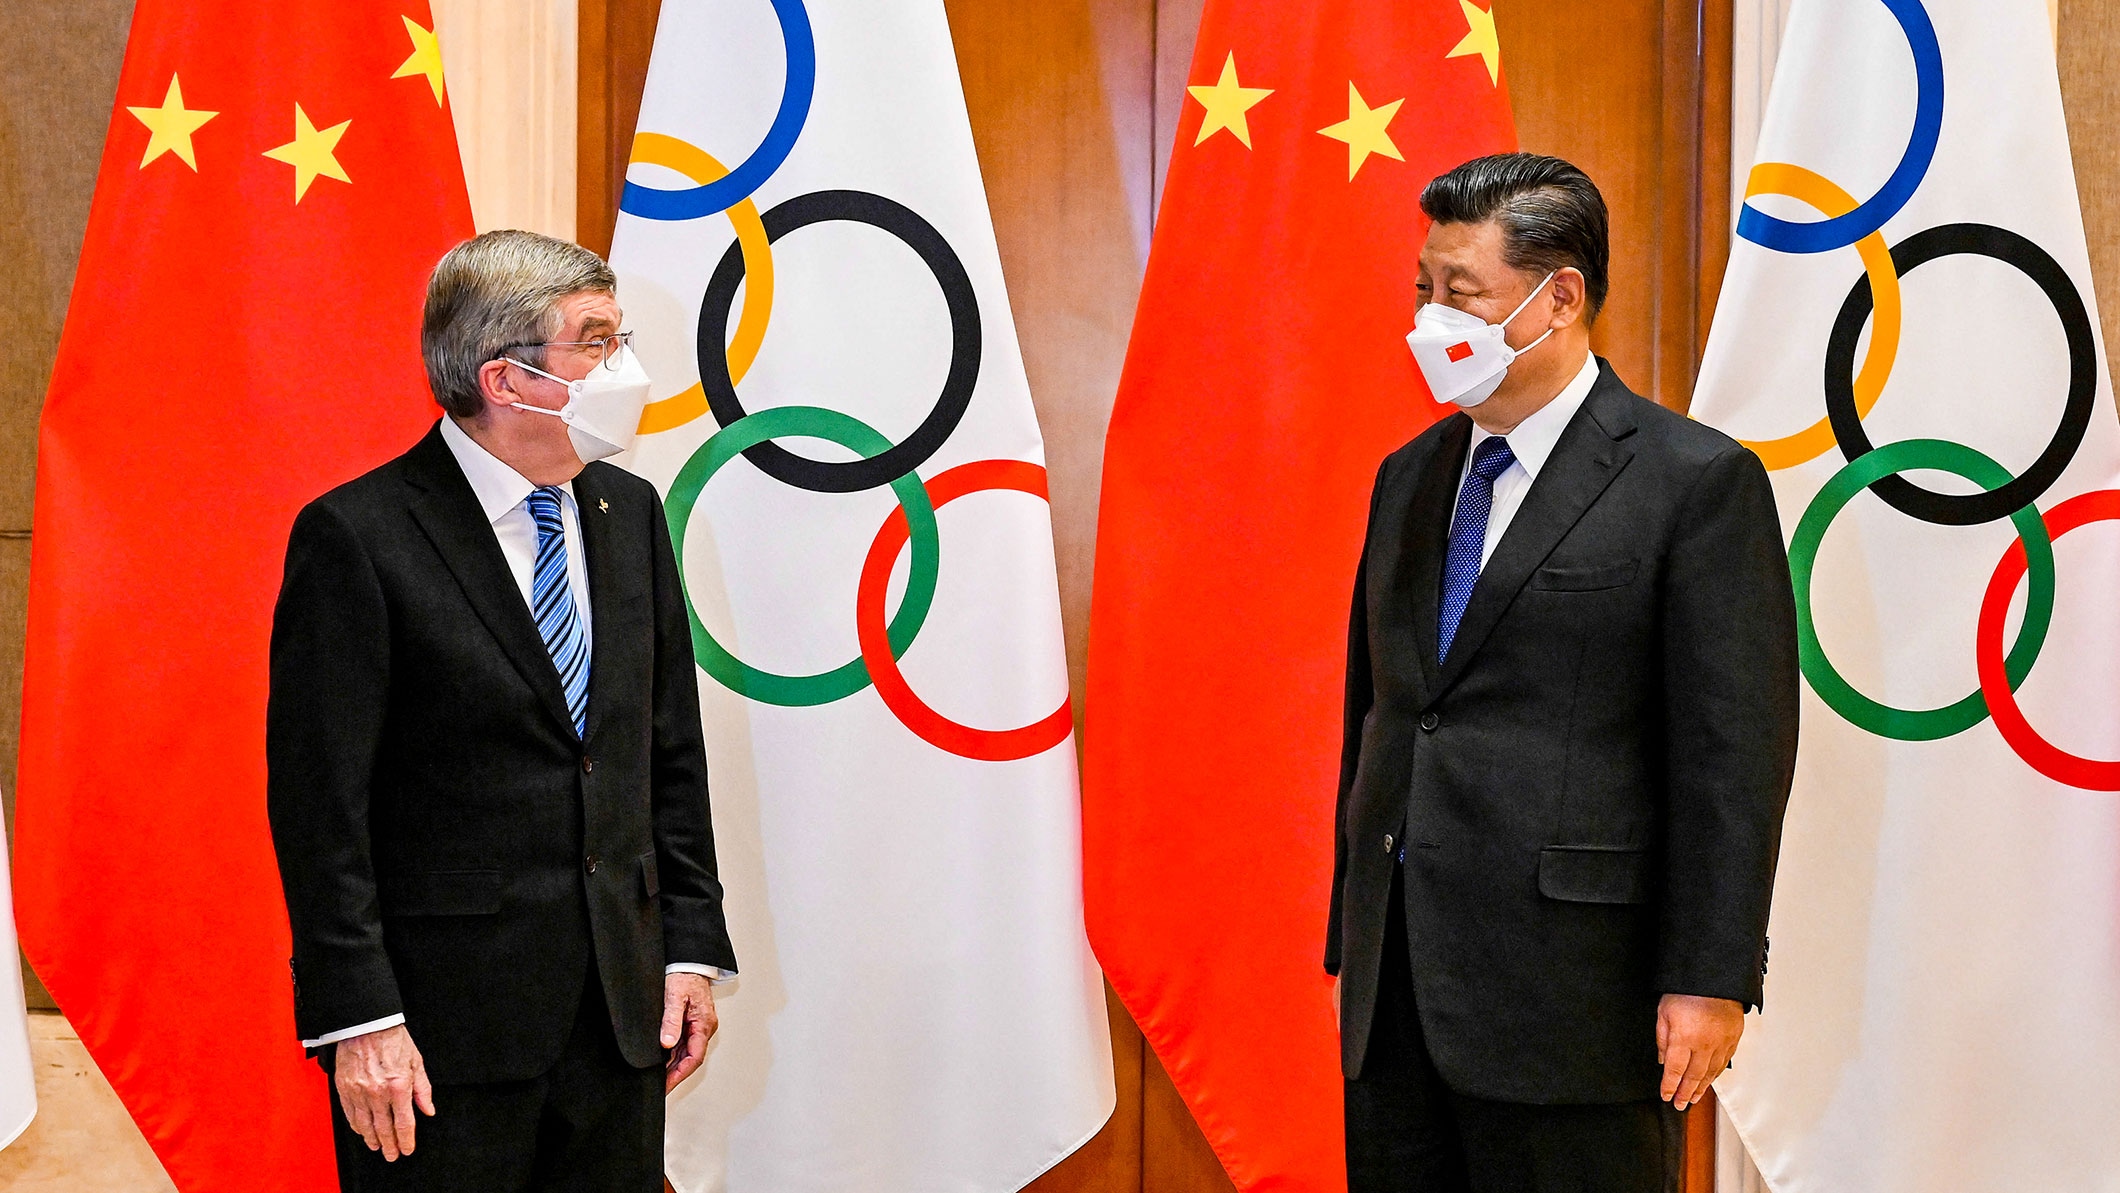 Xi Jinping welcomes IOC President Thomas Bach ahead of Olympic Winter Games Beijing 2022